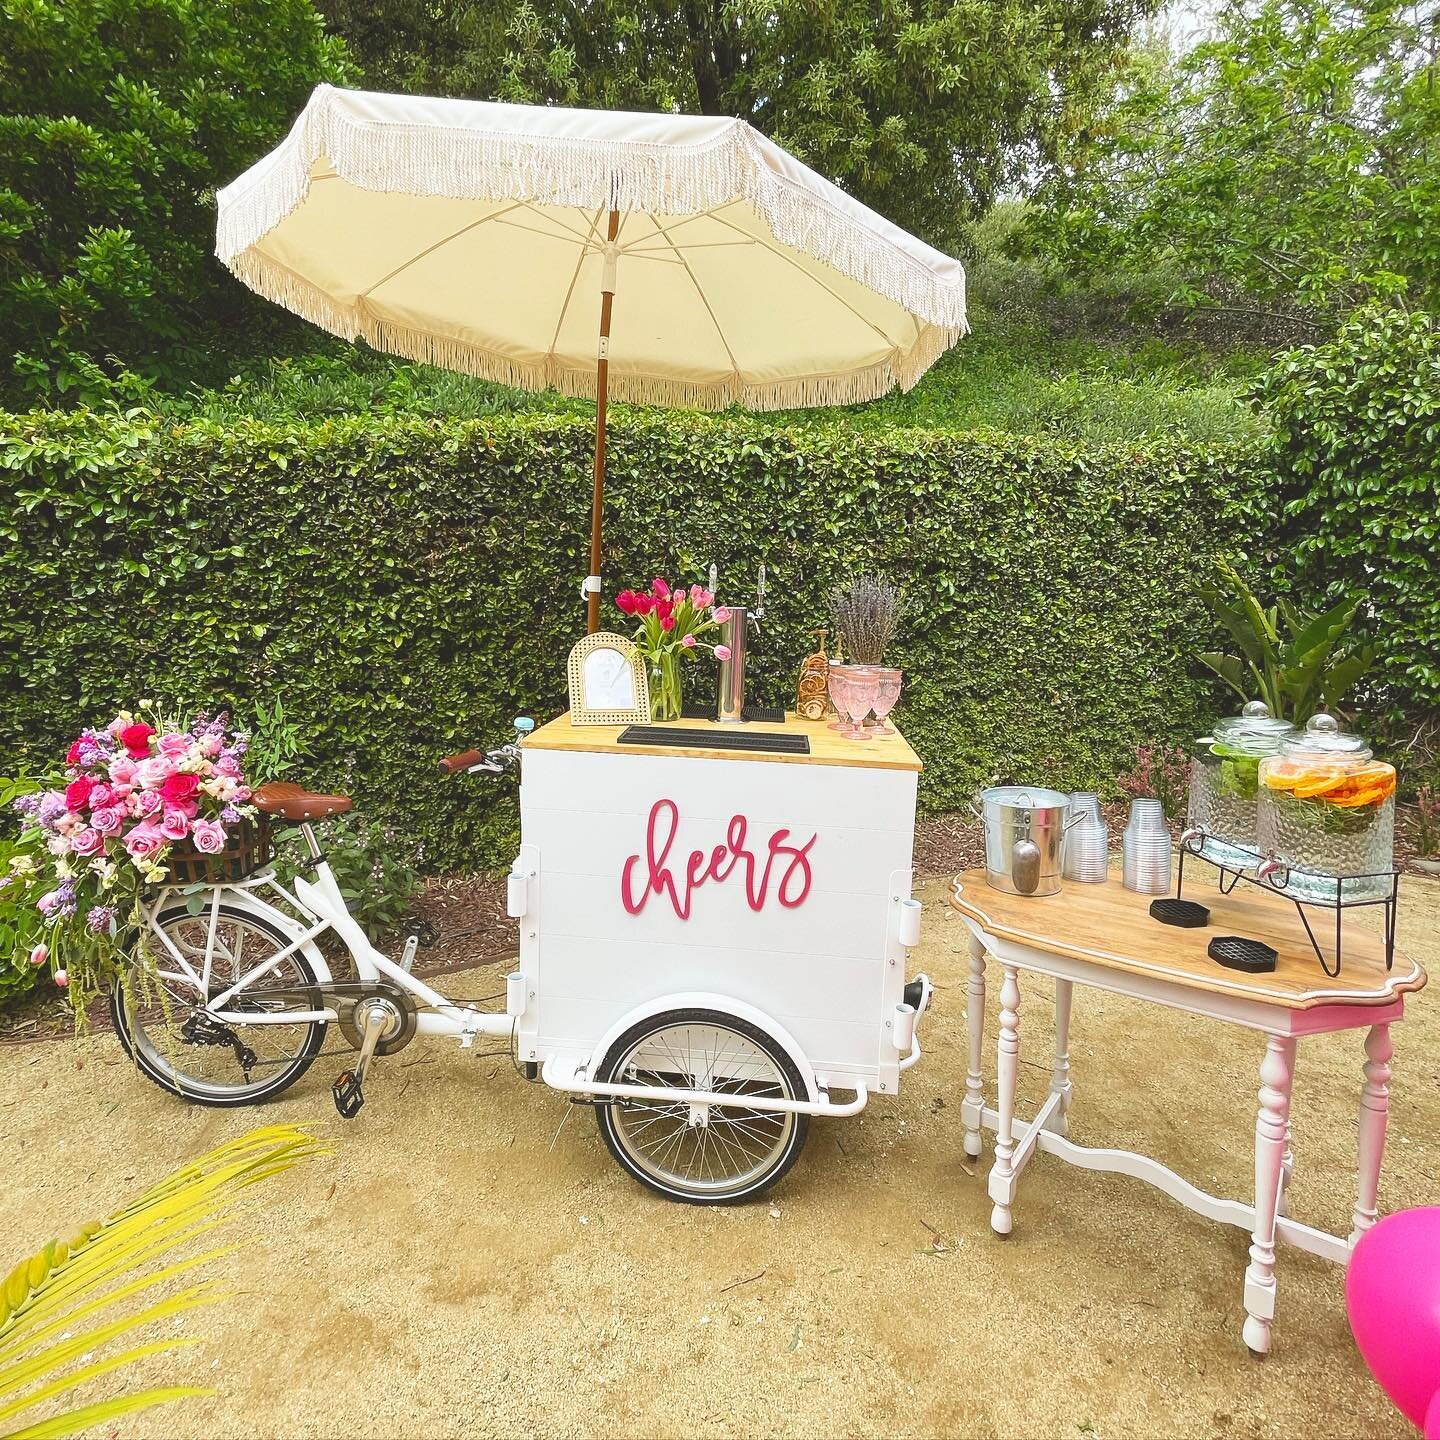 Tiptoe through the tulips&hellip;.all the way to this beautiful baby shower thrown by @wendyparkerevents 🥰🤰🏻🌷

We served @porchpounder Rose on one tap, and our lovely lavender lemonade on the other! 🪻🍋🍷

The incredible vendors:
Tap Trike: @hap